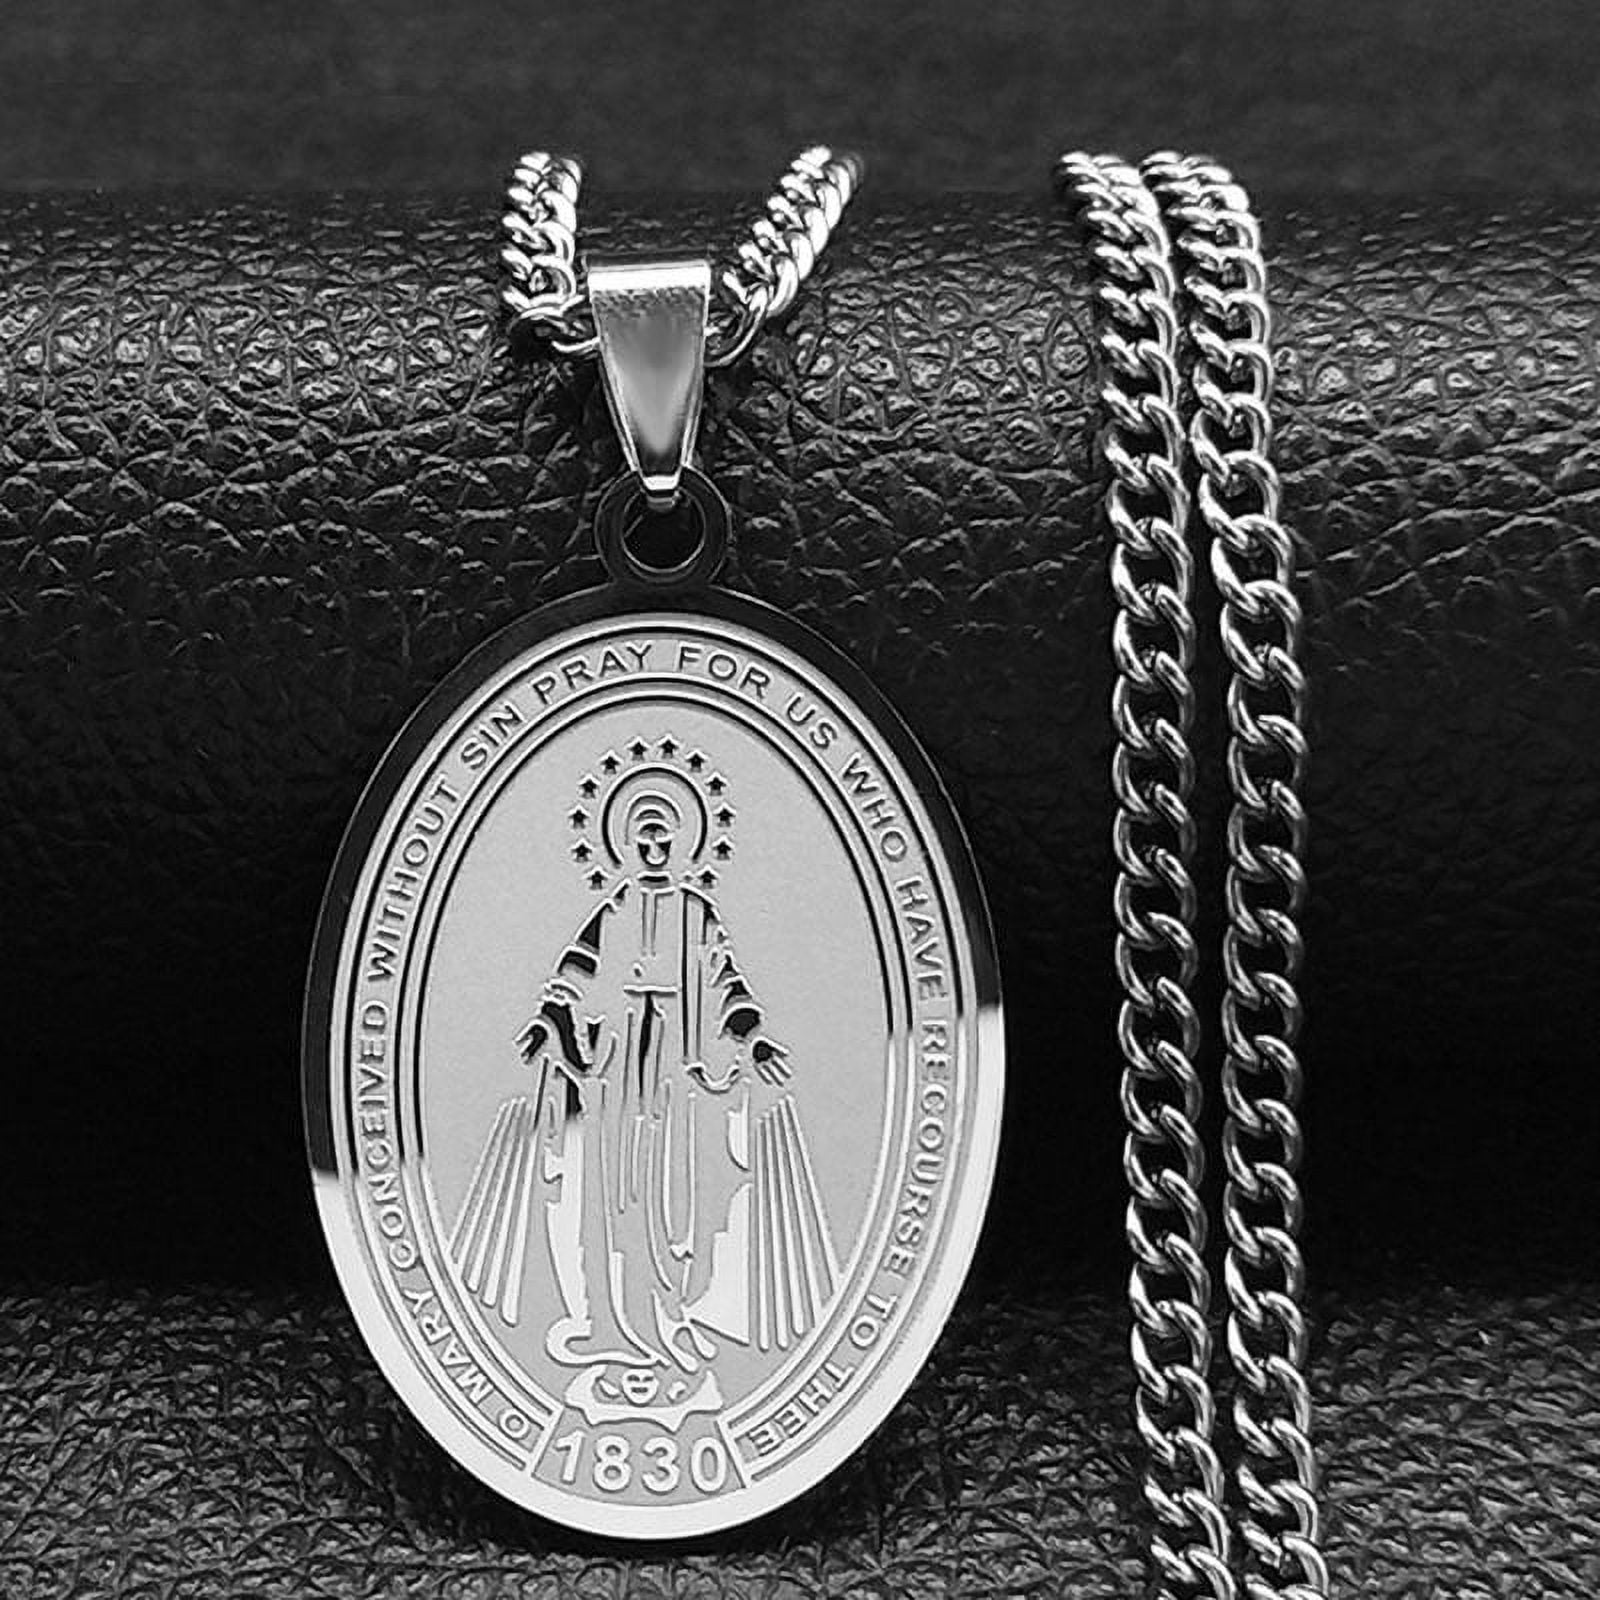 Oval Tag Virgin Mary Prayer Necklace Men Women Stainless Steel Gold Medal Necklace Jewelry f176fb1a b1e9 4609 b37a 6f3f91d00bf6.ea74b32b38425dde5c39dd27b5d2aab3